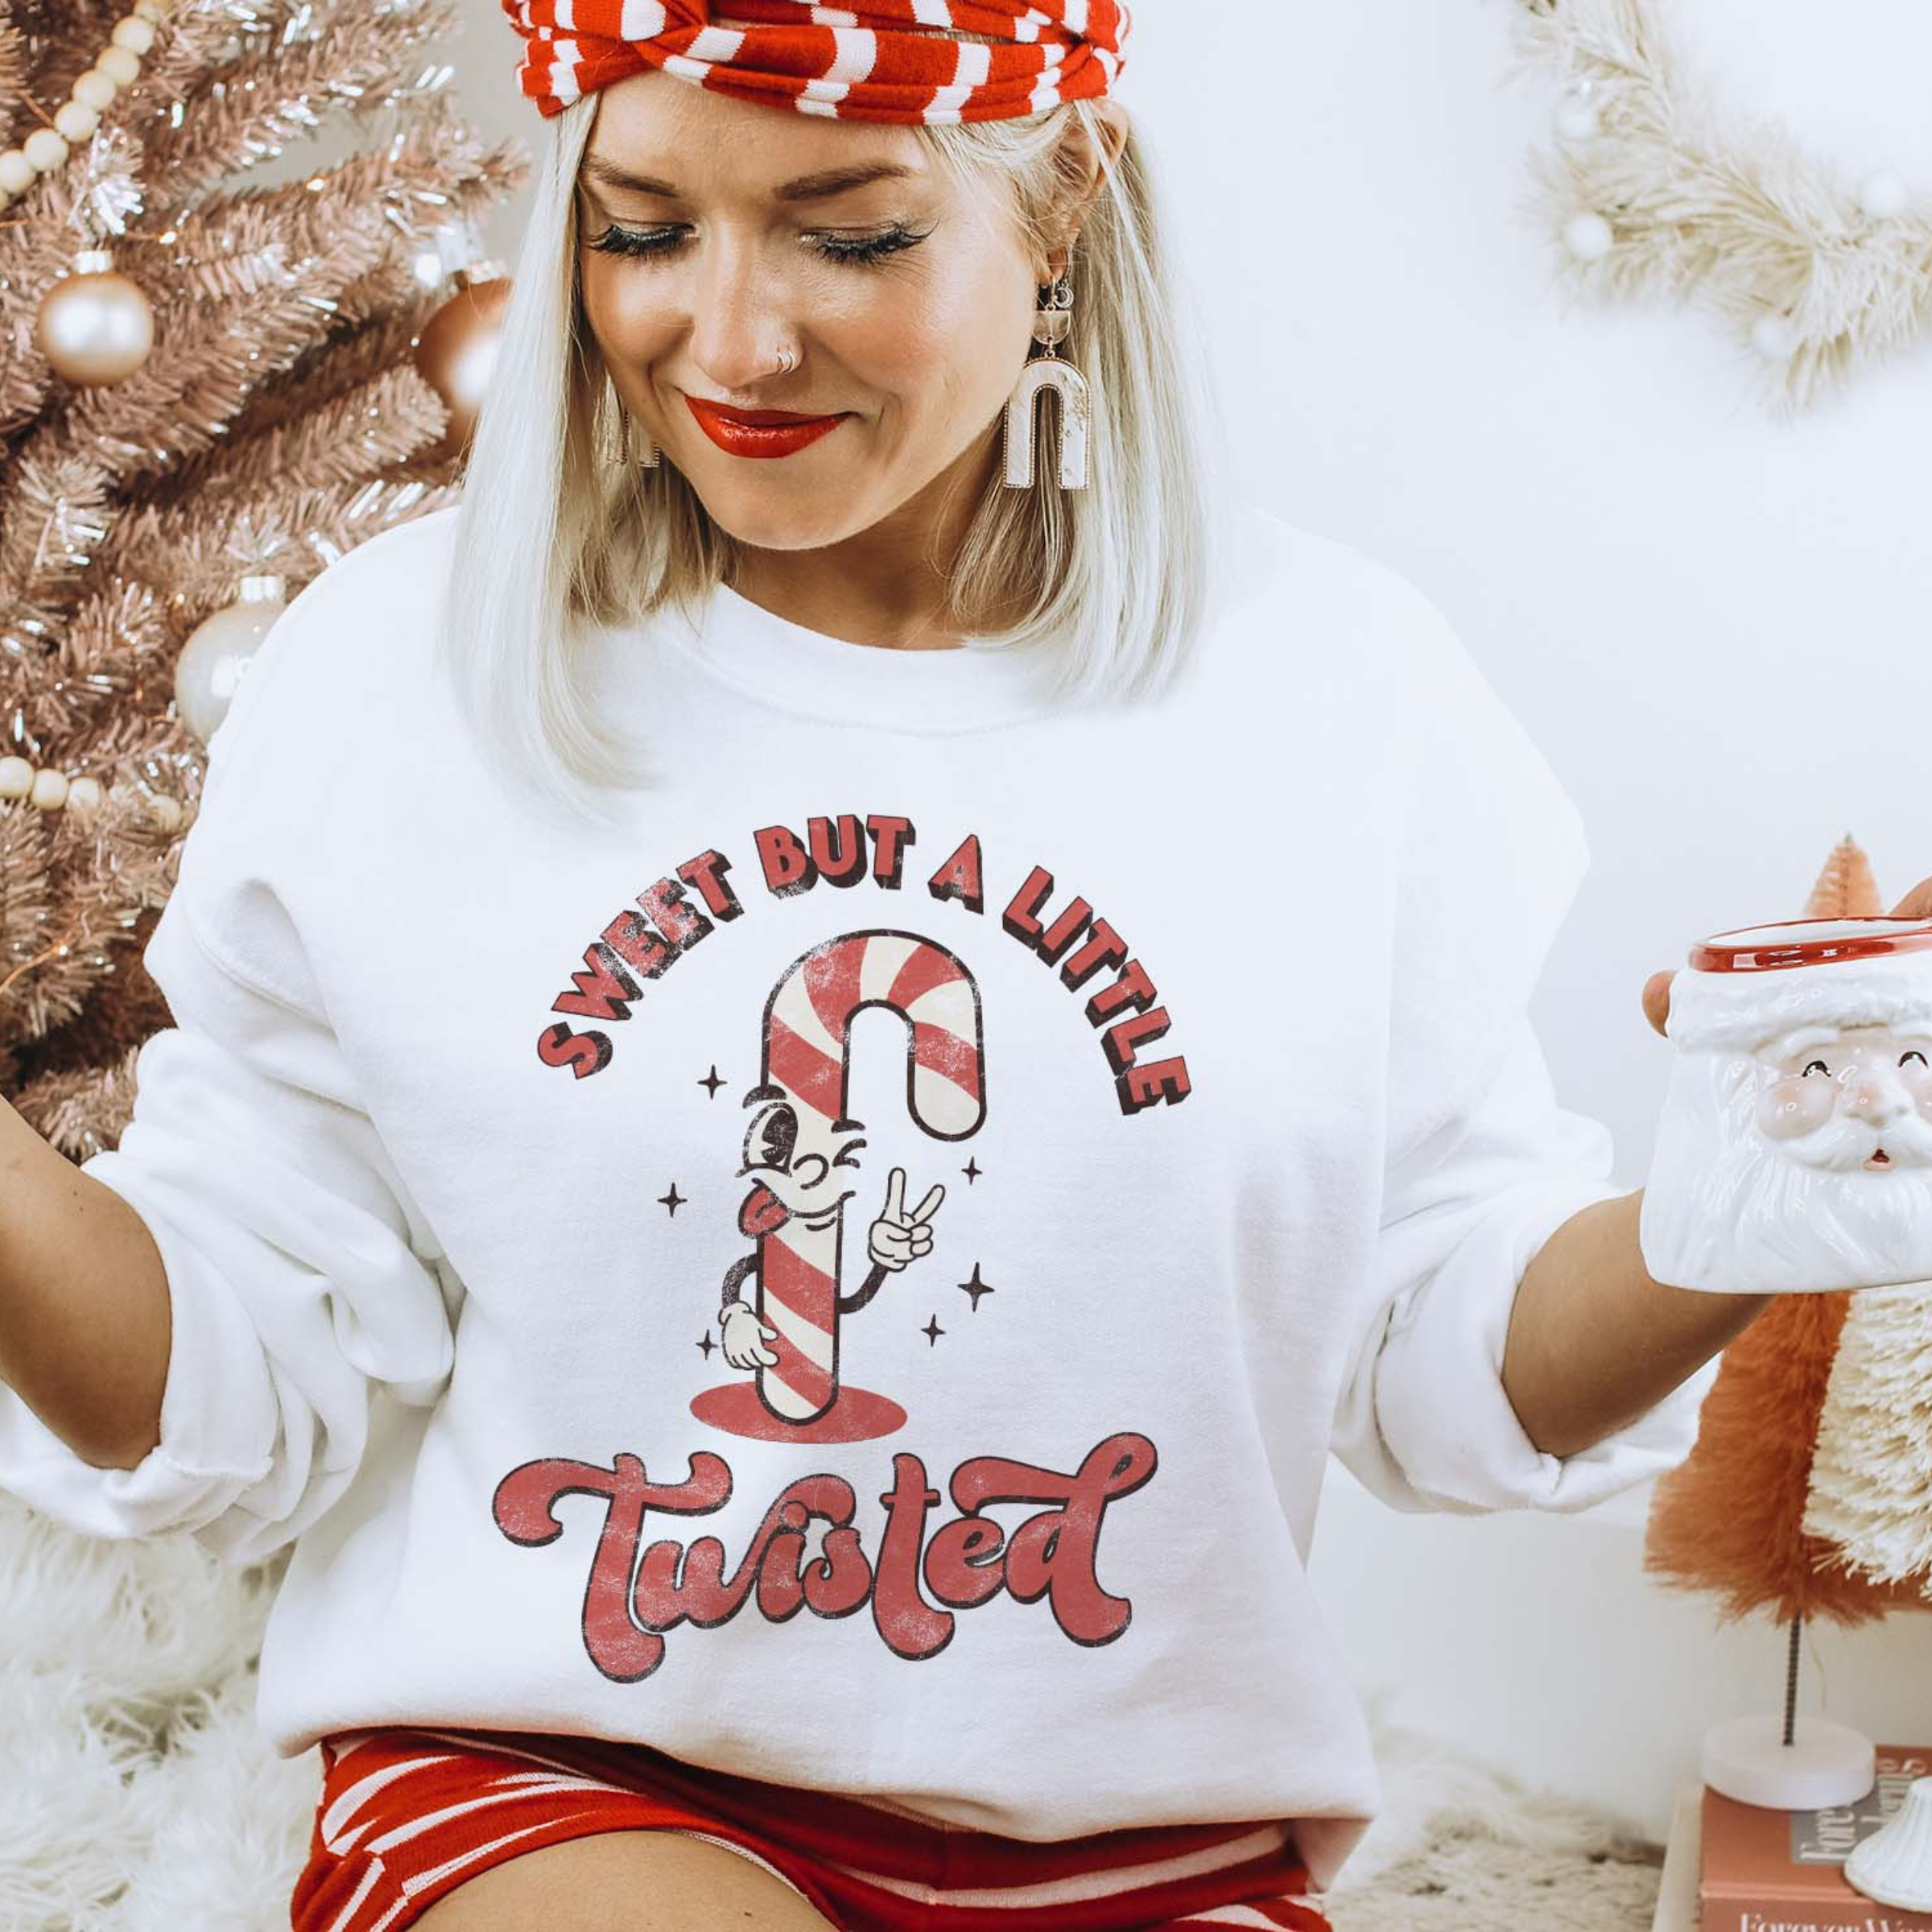 This white sweatshirt includes a crew neckline, long sleeves, and a graphic that says "Sweet But A Little Twisted" in a mix of cute, red fonts with a candy cane throwing up the peace sign. The model has this sweatshirt paired with a red and white striped headband, white earrings, and a red and white striped pair of shorts. She also has the sleeves rolled and she is holding a Santa Clause mug. 